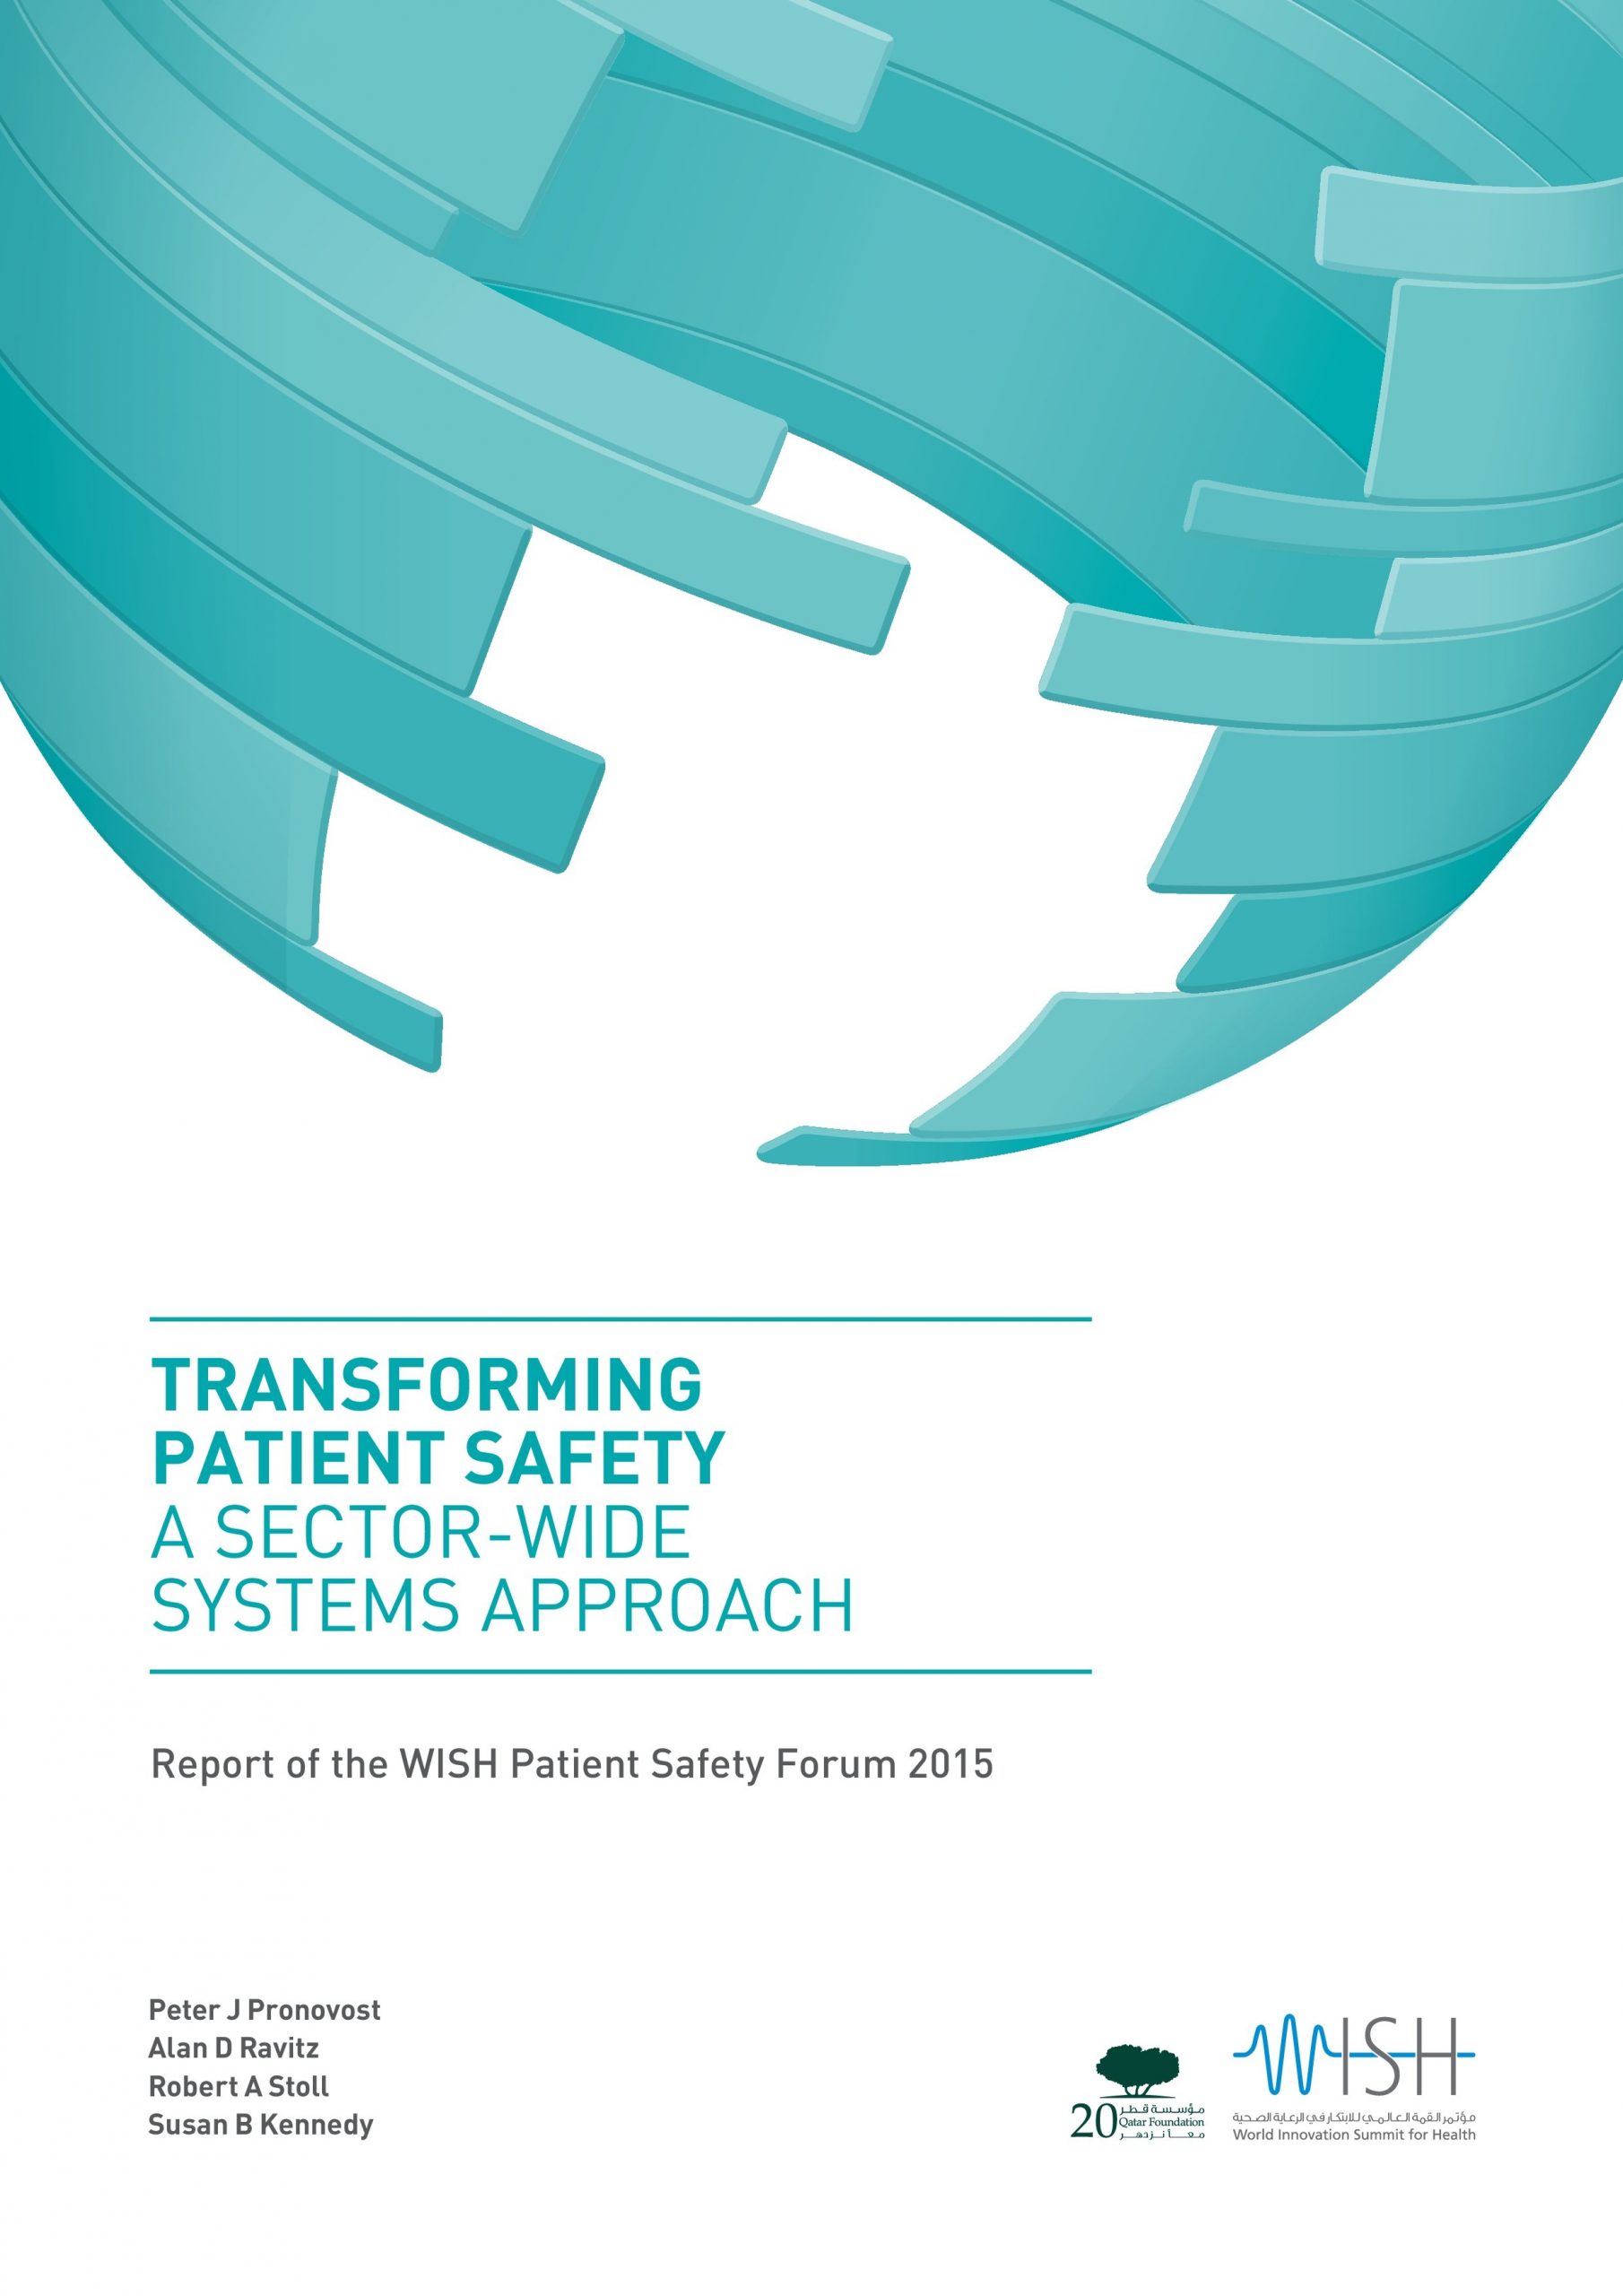 Transforming Patient Safety: A Sector-Wide Systems Approach